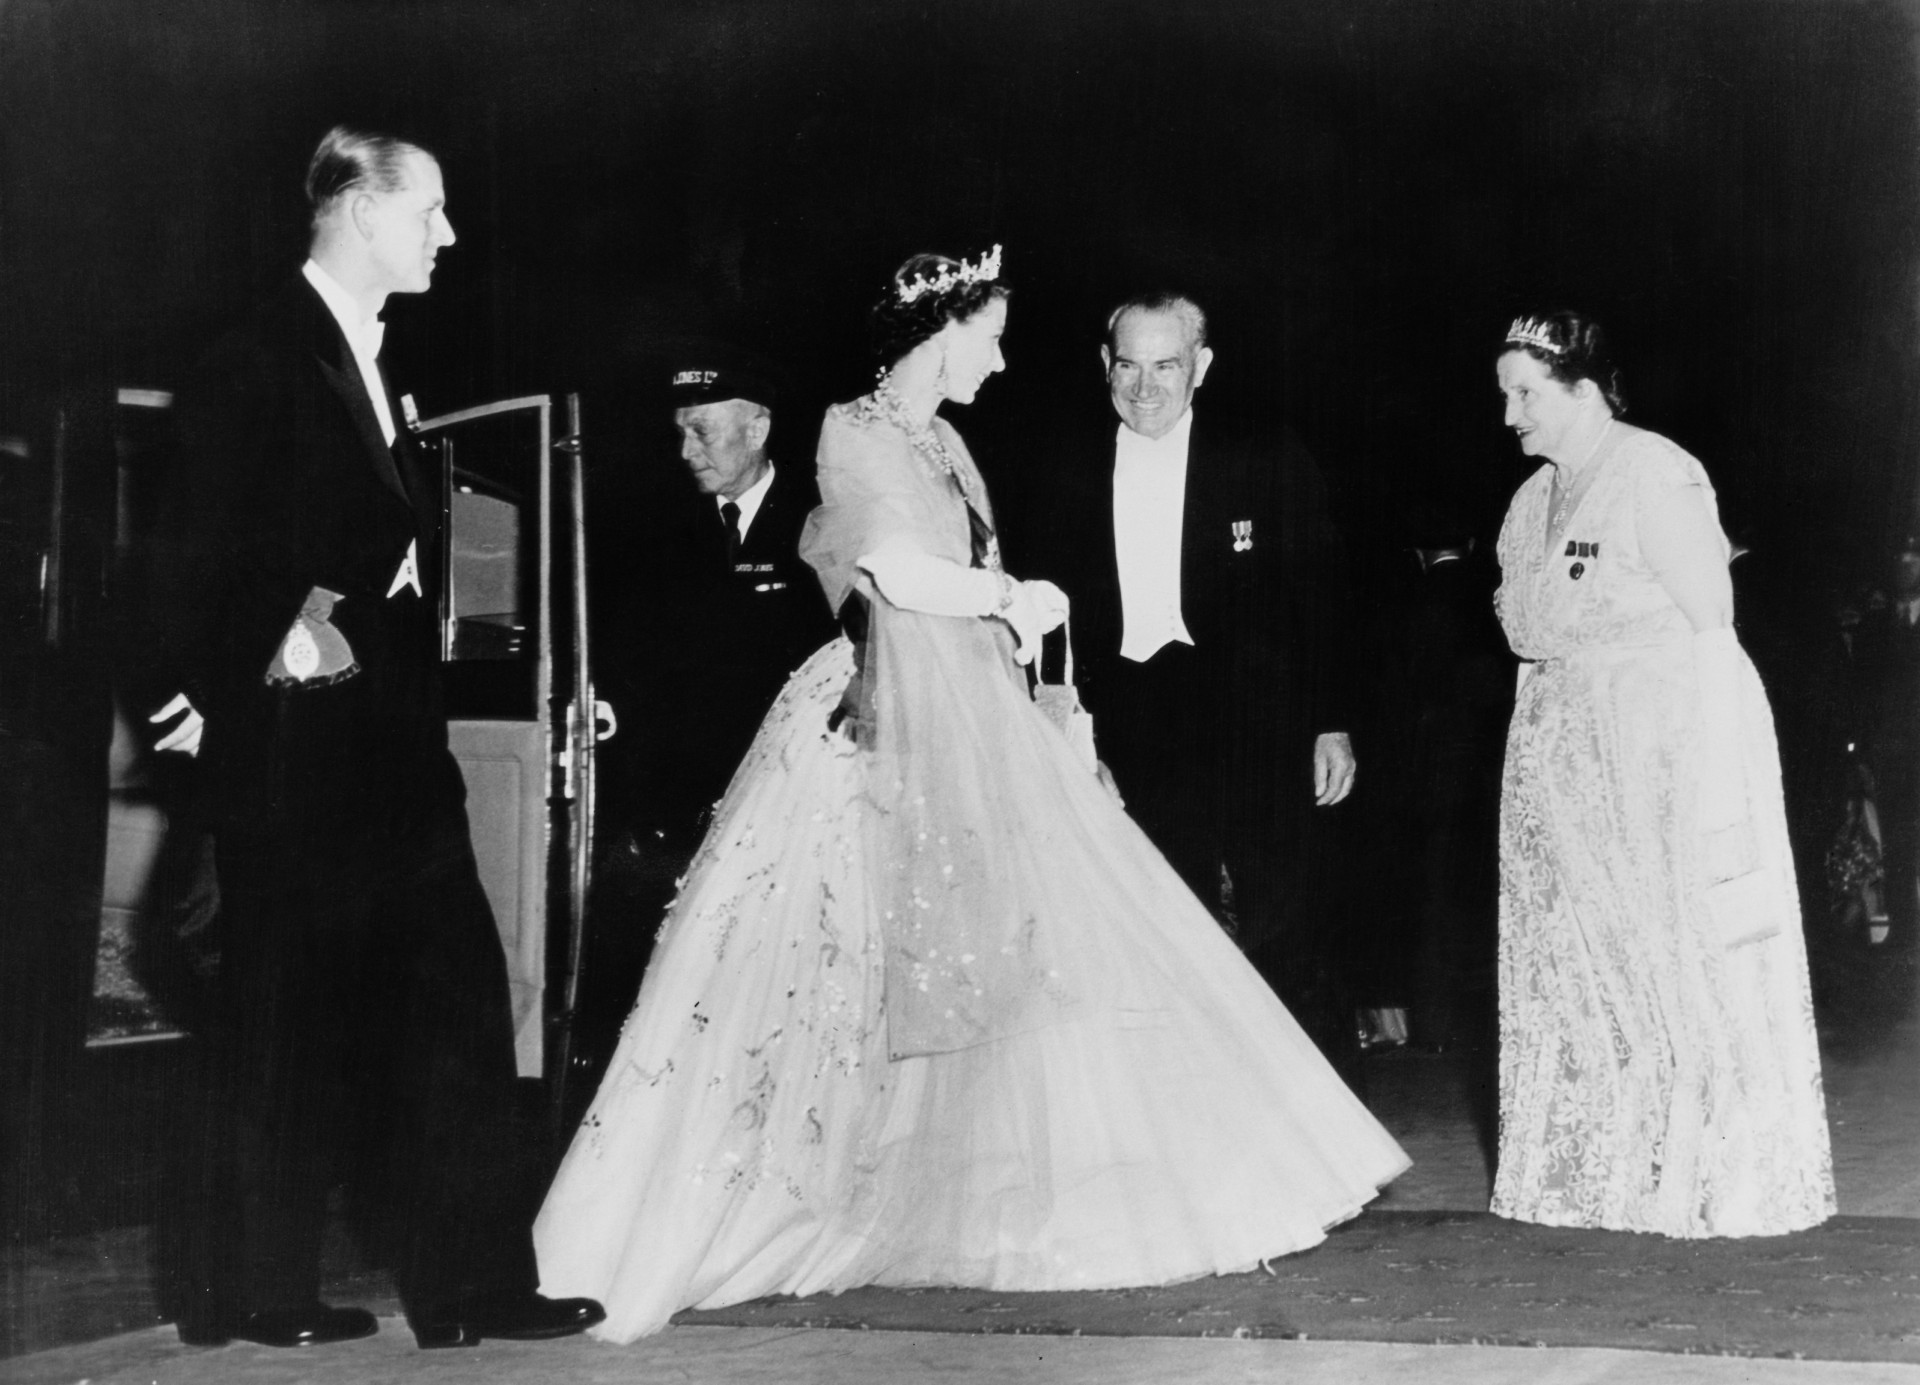 The royals are greeted by Premier of New South Wales Joseph Cahill and his wife, Esmey, before a state banquet in Sydney.<p><a href="https://www.msn.com/en-za/community/channel/vid-7xx8mnucu55yw63we9va2gwr7uihbxwc68fxqp25x6tg4ftibpra?cvid=94631541bc0f4f89bfd59158d696ad7e">Follow us and access great exclusive content every day</a></p>